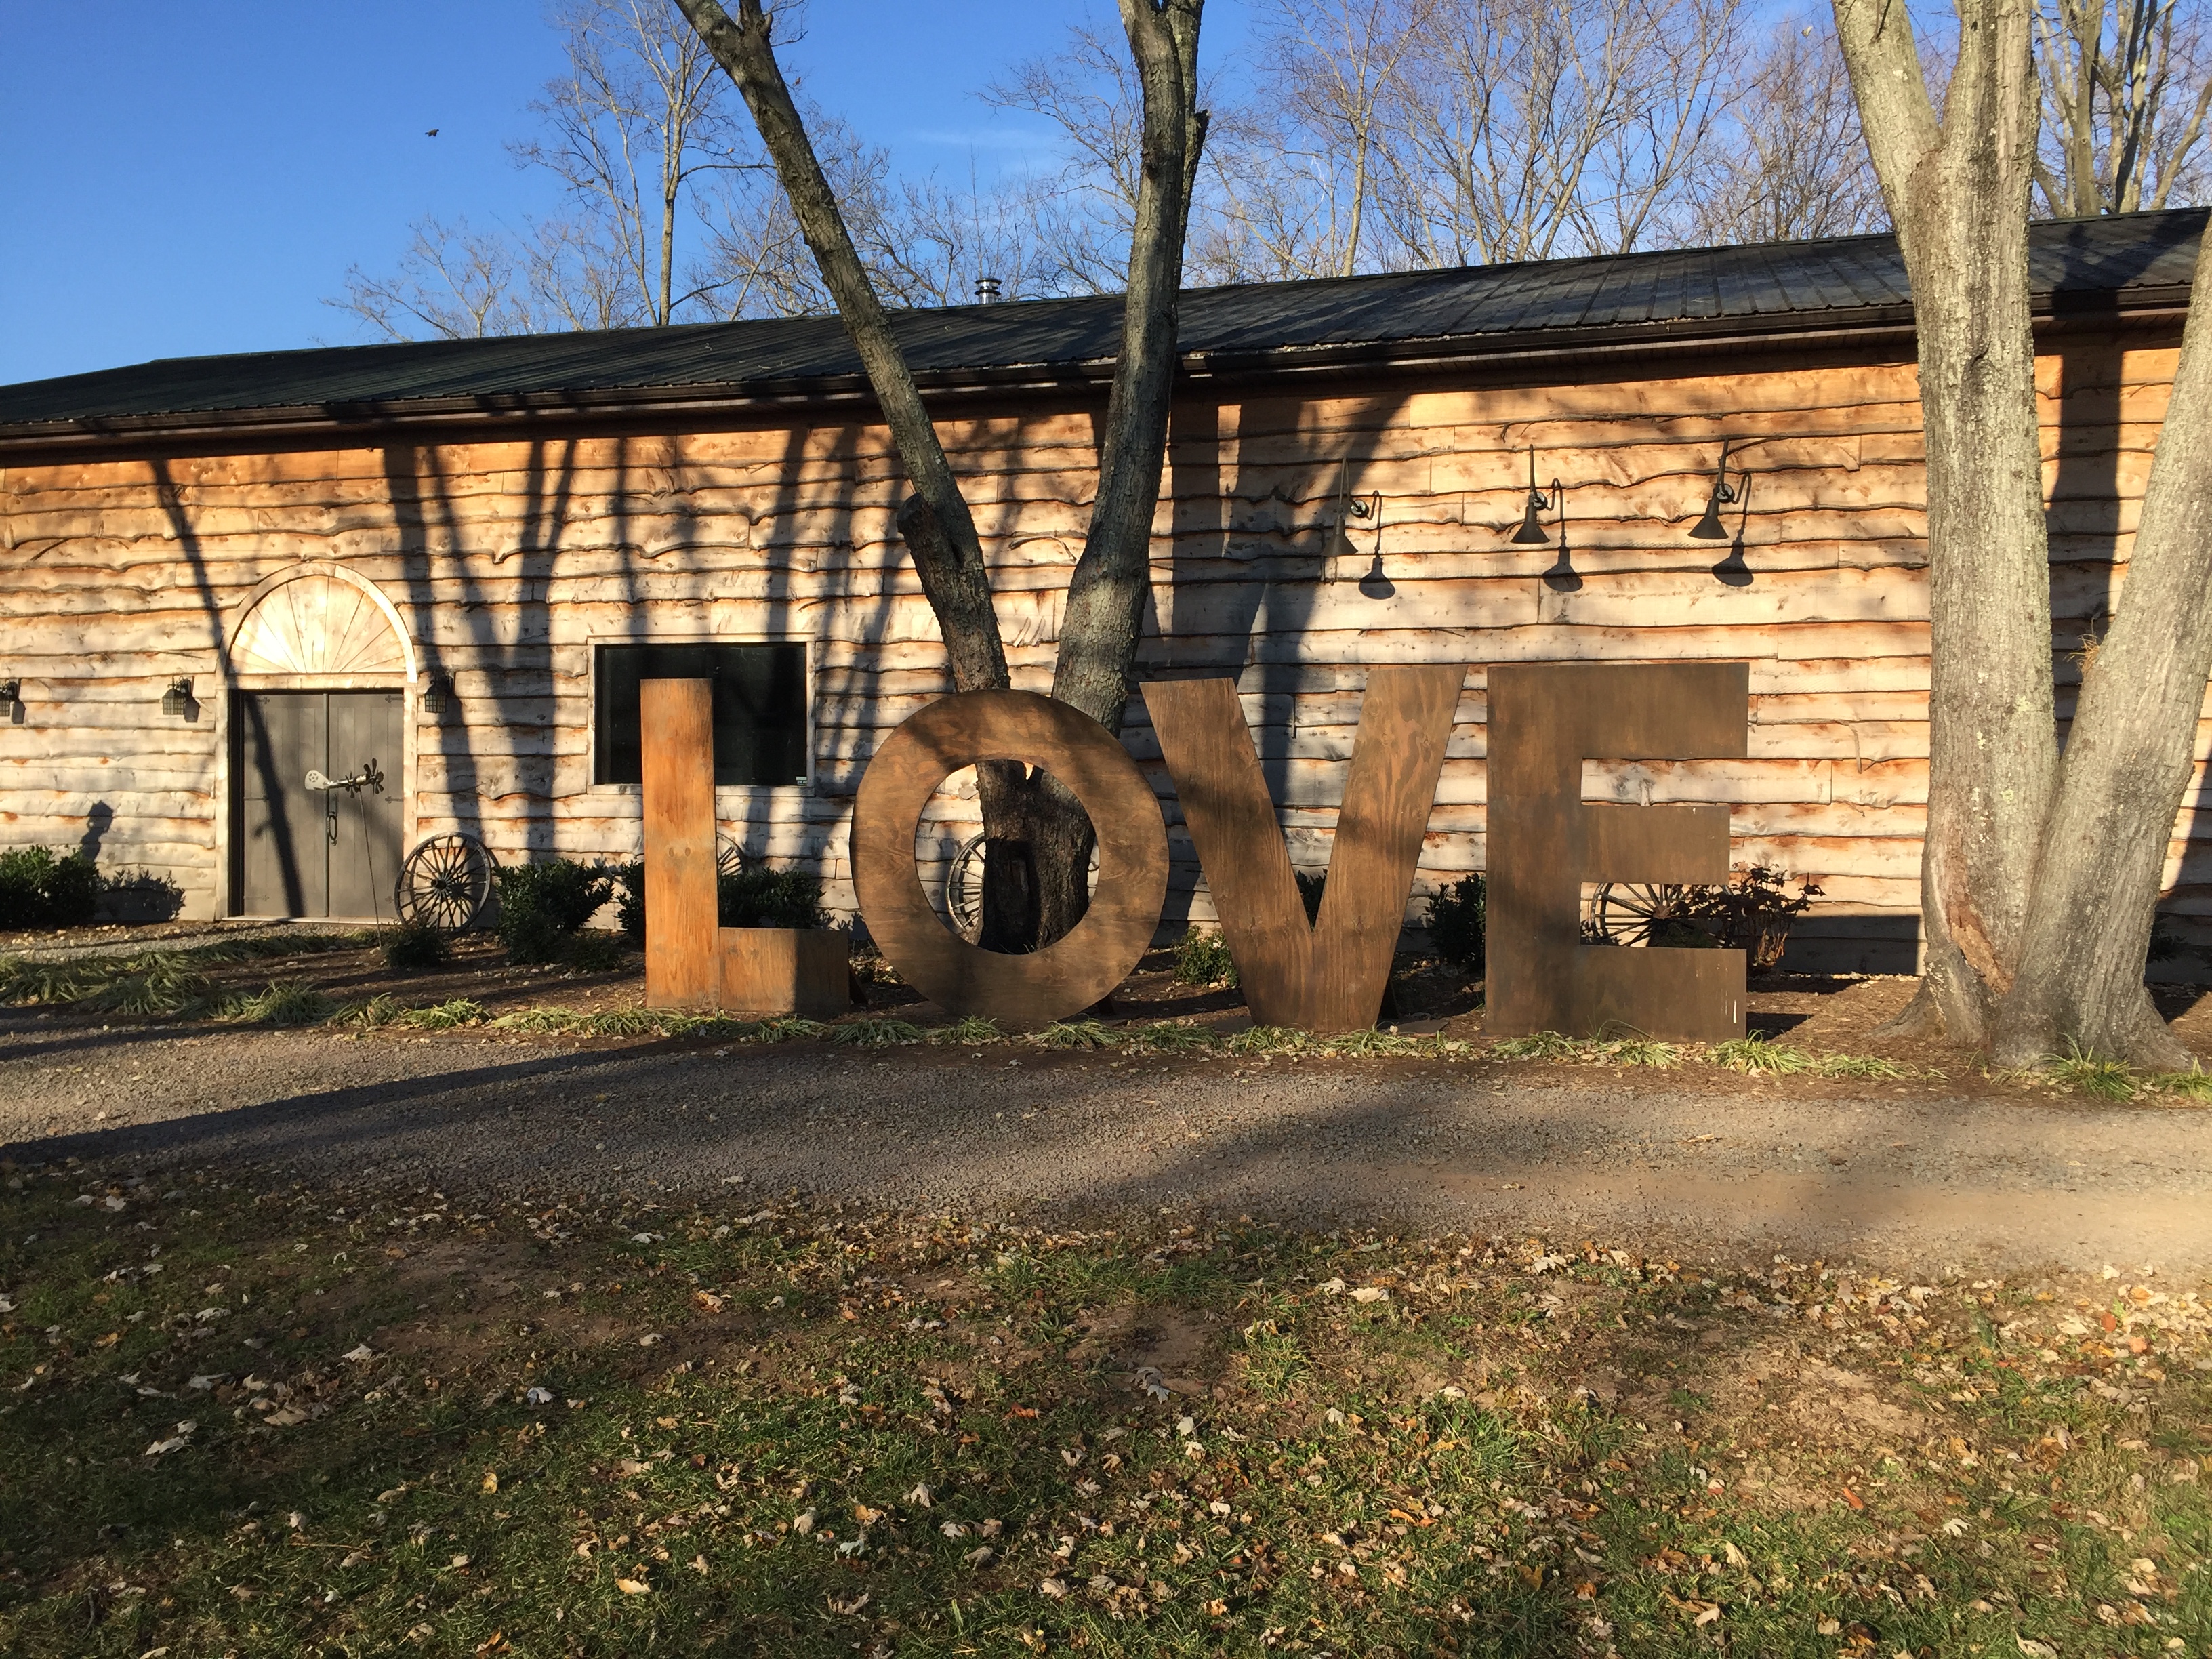 LOVEwork at Old House Vineyards - Virginia Is For Lovers